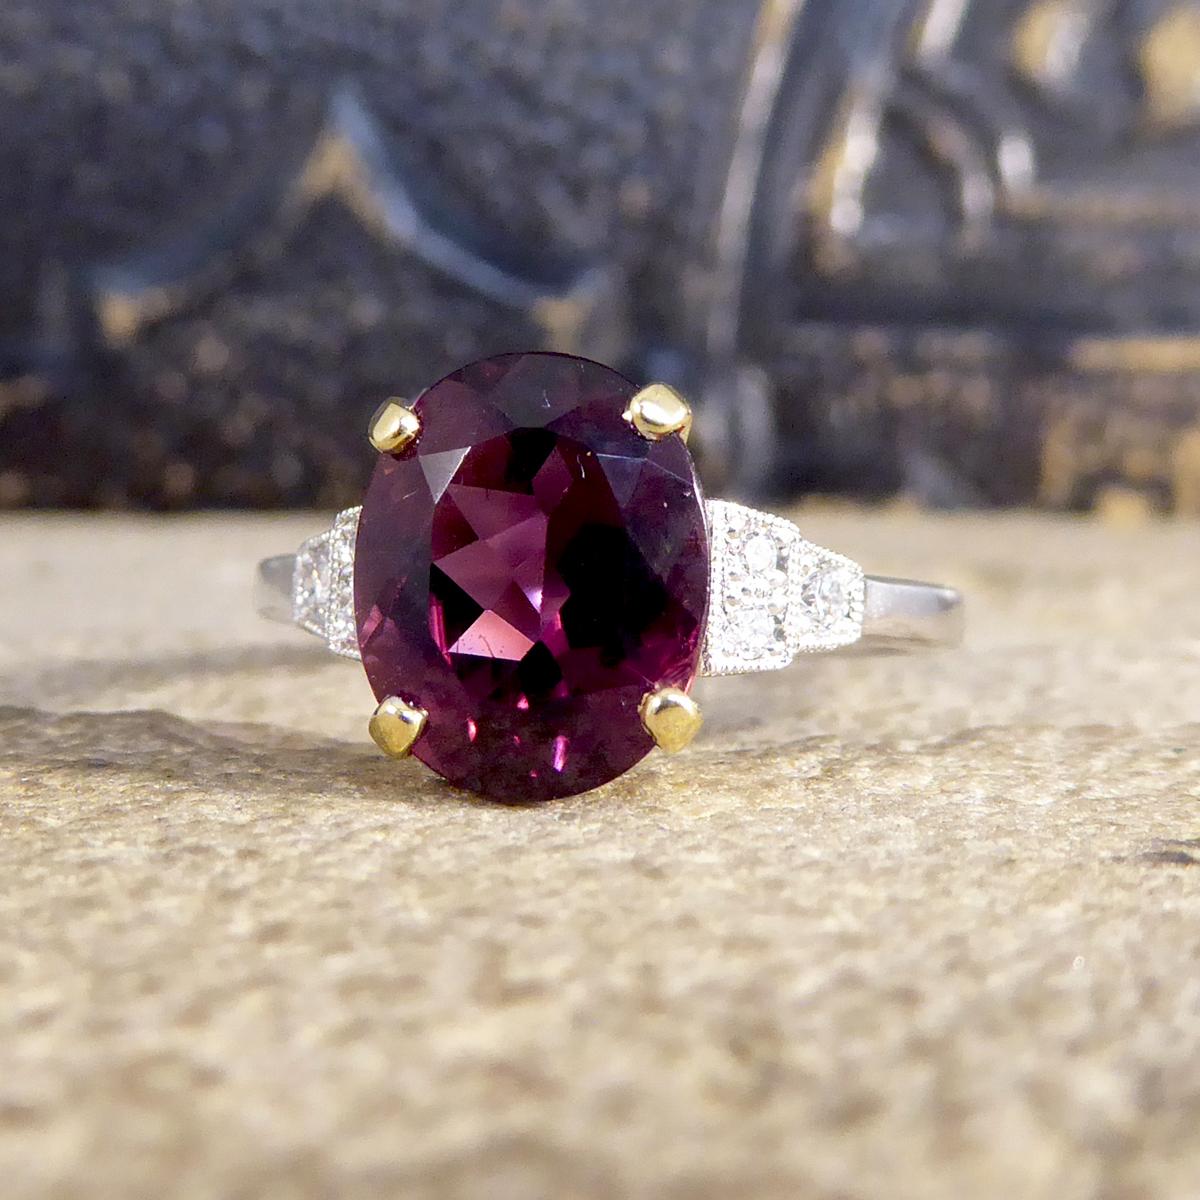 Deco Replica 2.77ct Raspberry Red Tourmaline and Diamond Ring in White Gold In New Condition For Sale In Yorkshire, West Yorkshire